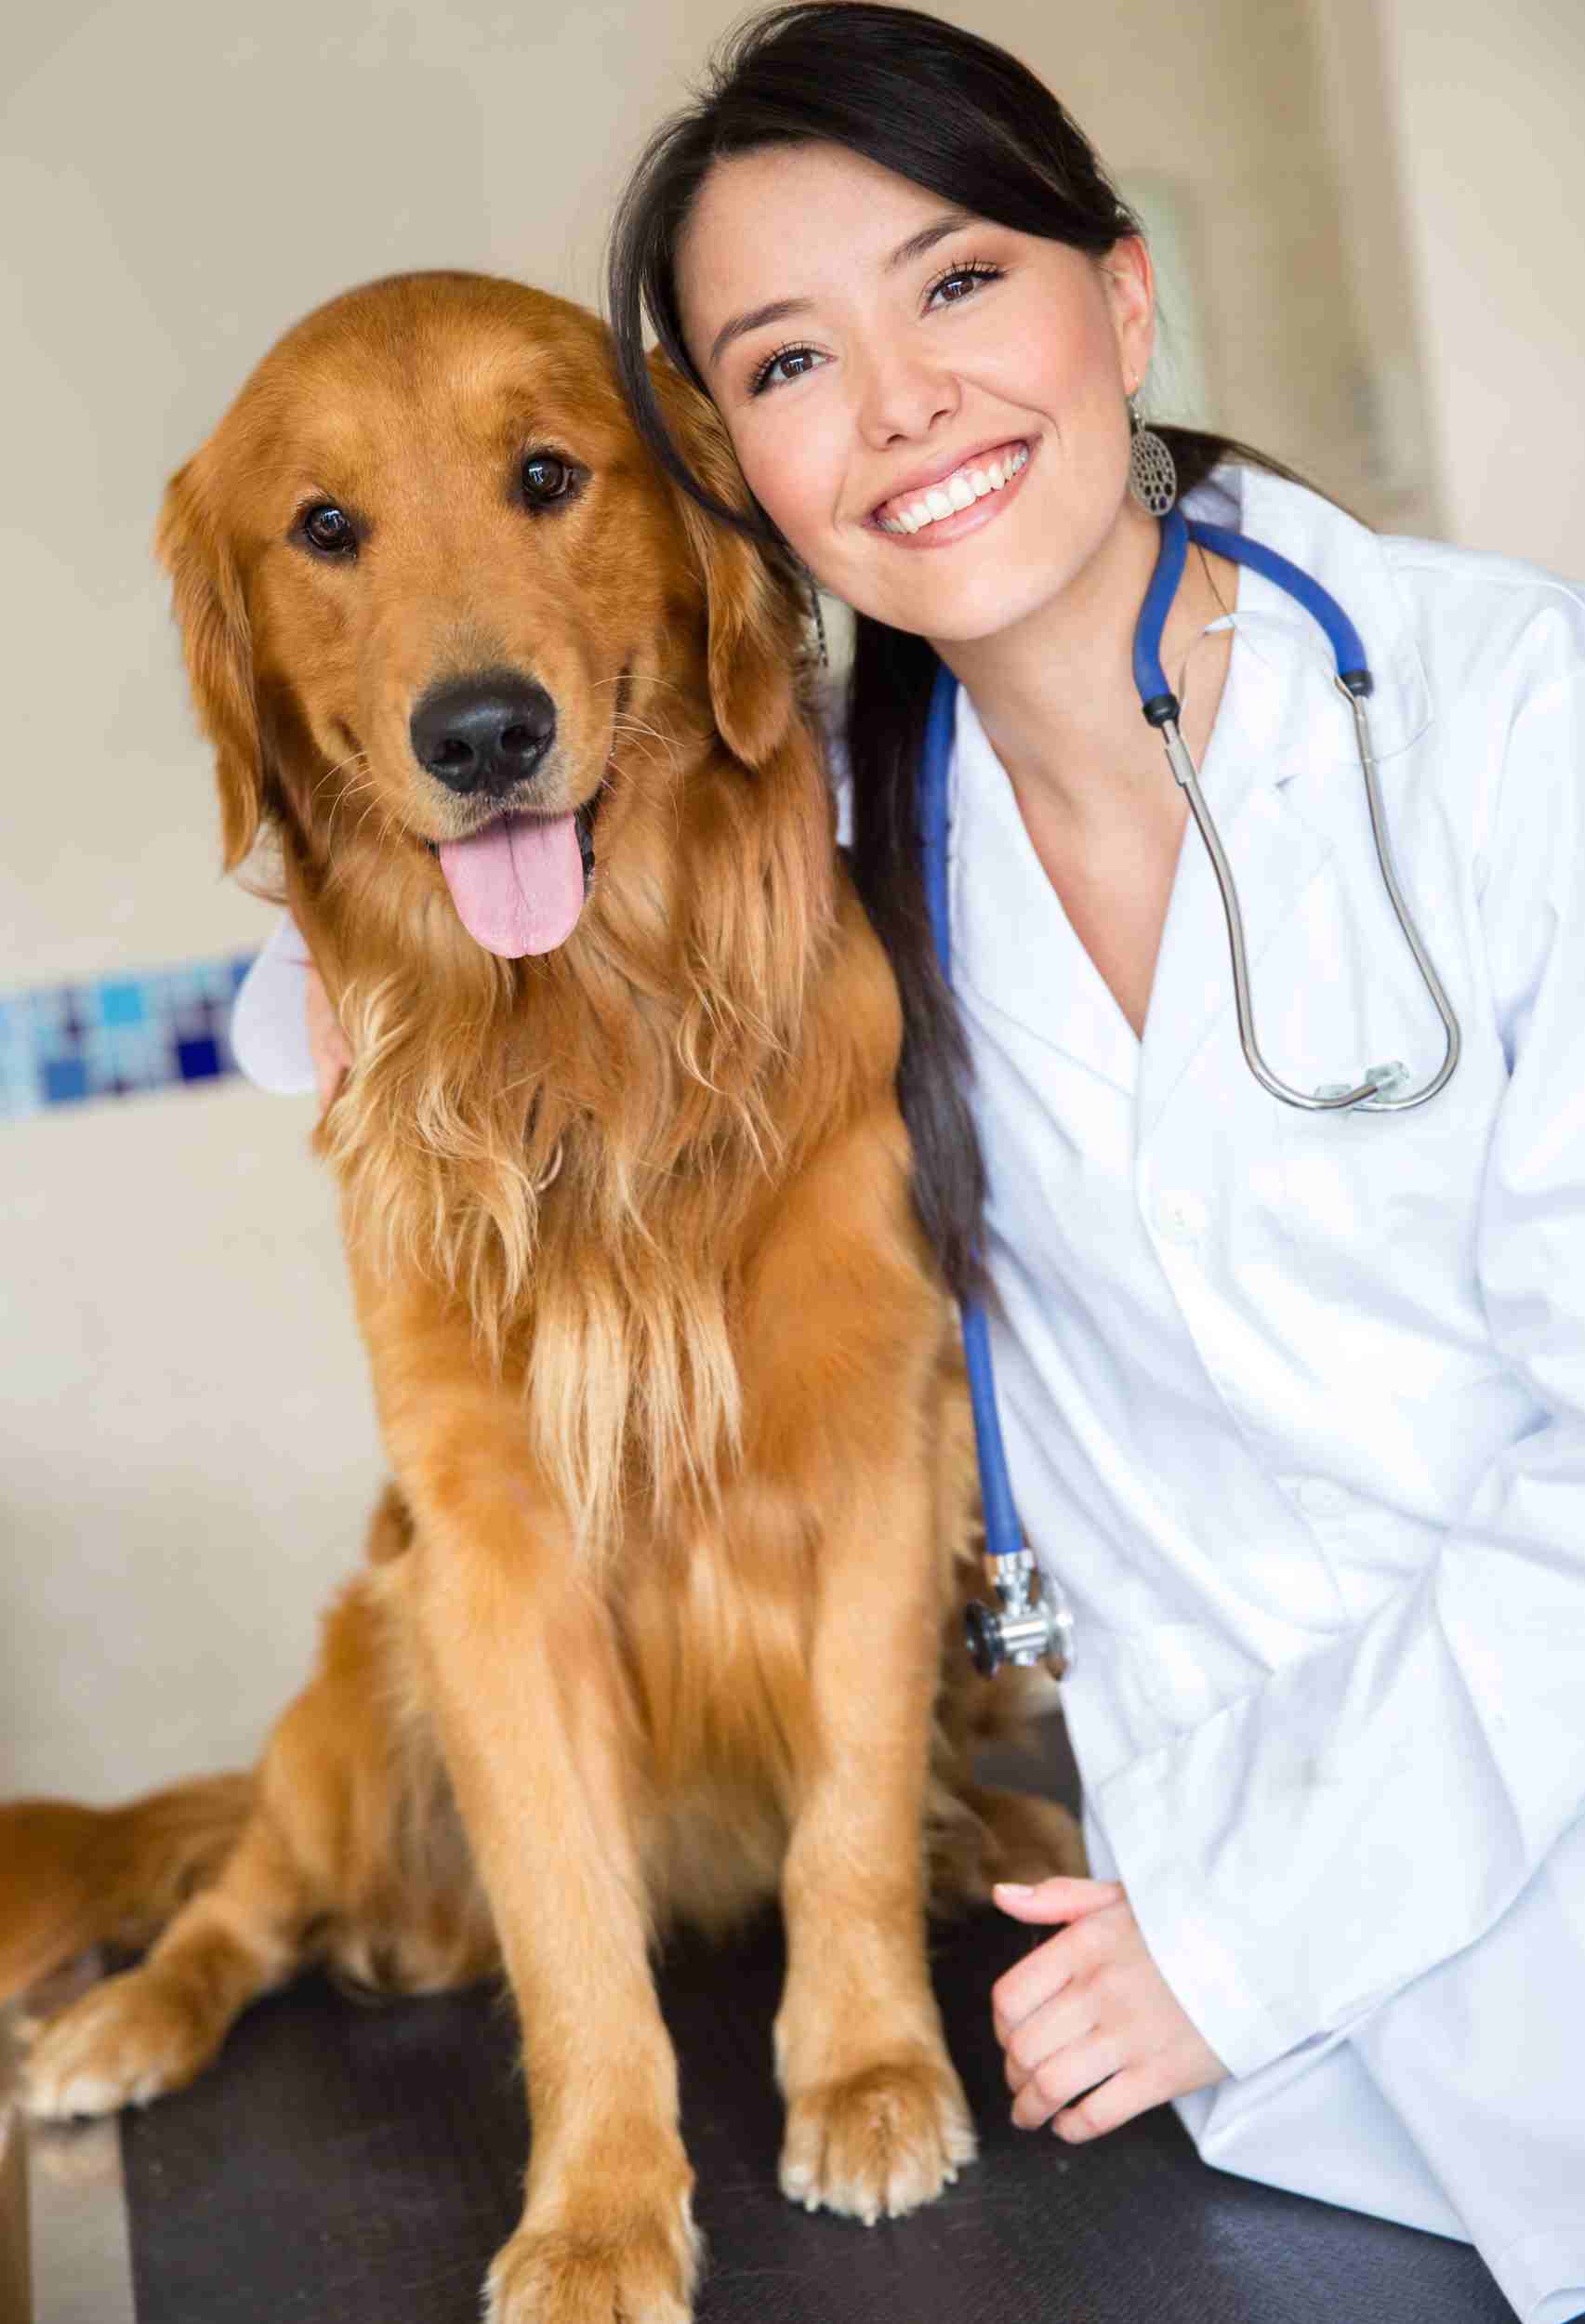 Dog Health Conditions for New Owners to Be Aware Of